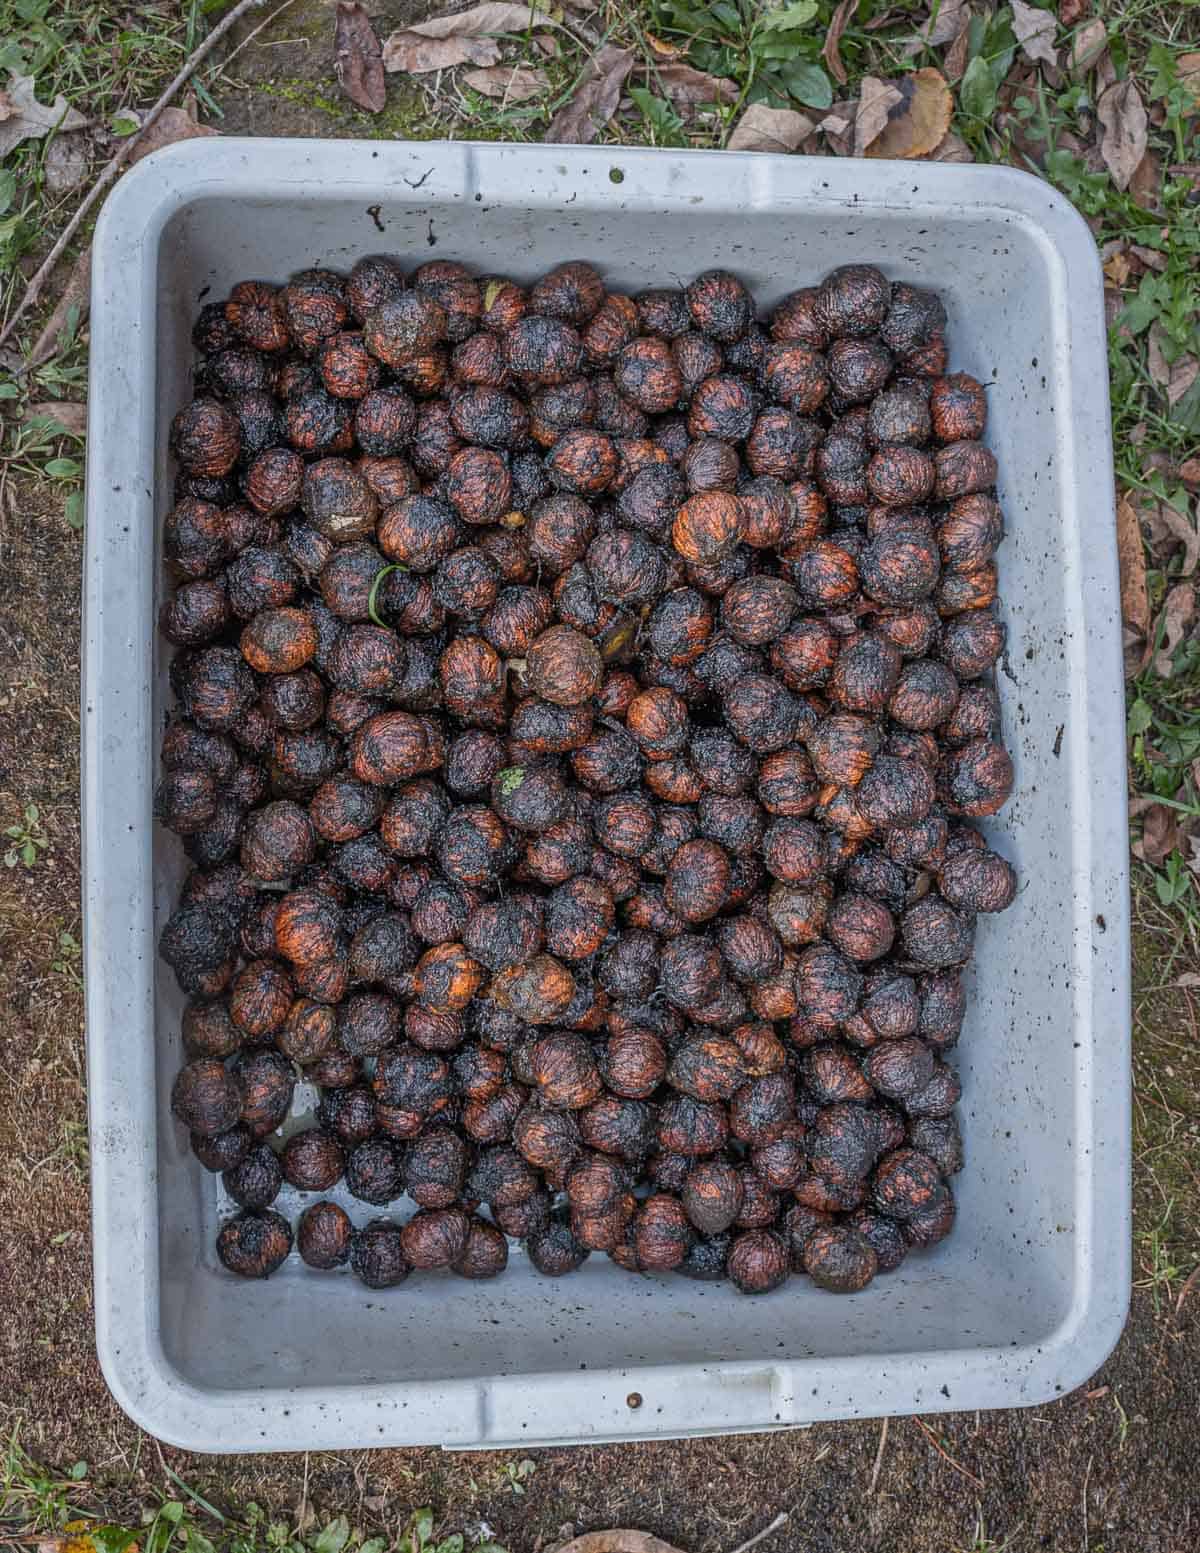 Washed black walnuts ready to be dried and cured